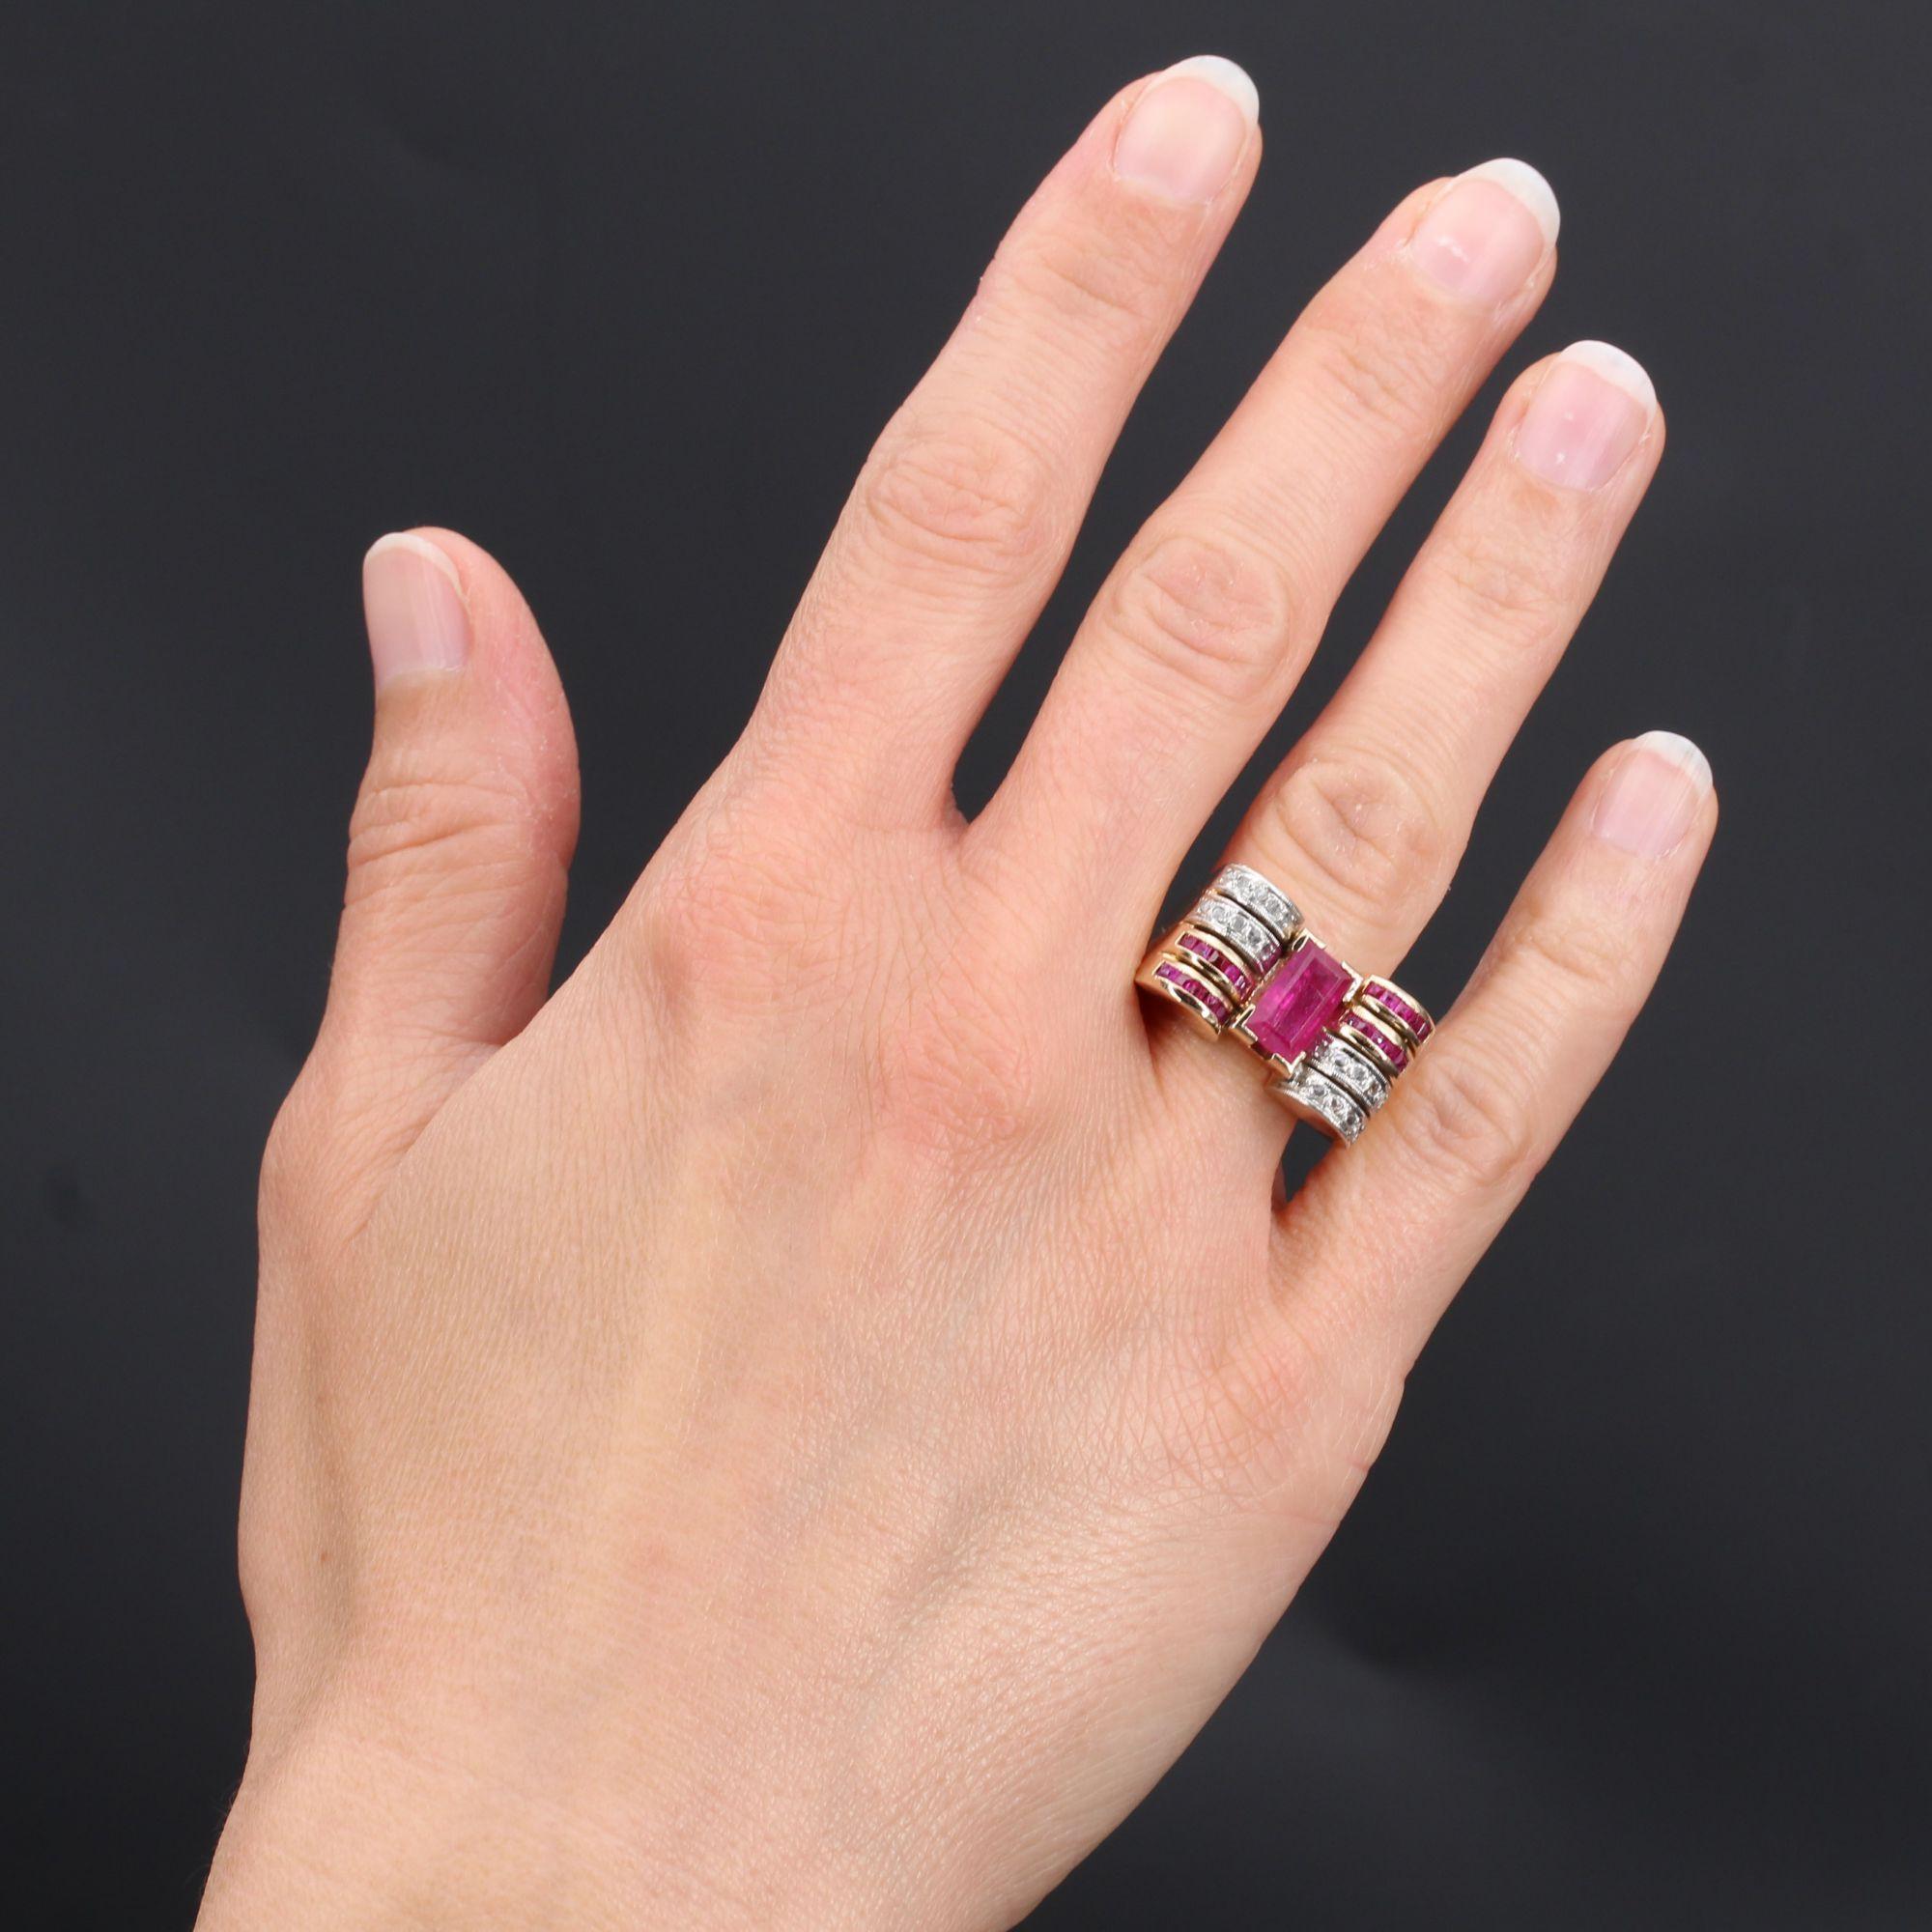 Ring in 18 karat yellow gold, eagle head hallmark, and platinum, dog head hallmark.
Voluminous tank ring, it is decorated in its center with an emerald-cut ruby, with two rows of rose-cut diamonds and two rows of calibrated synthetic rubies on